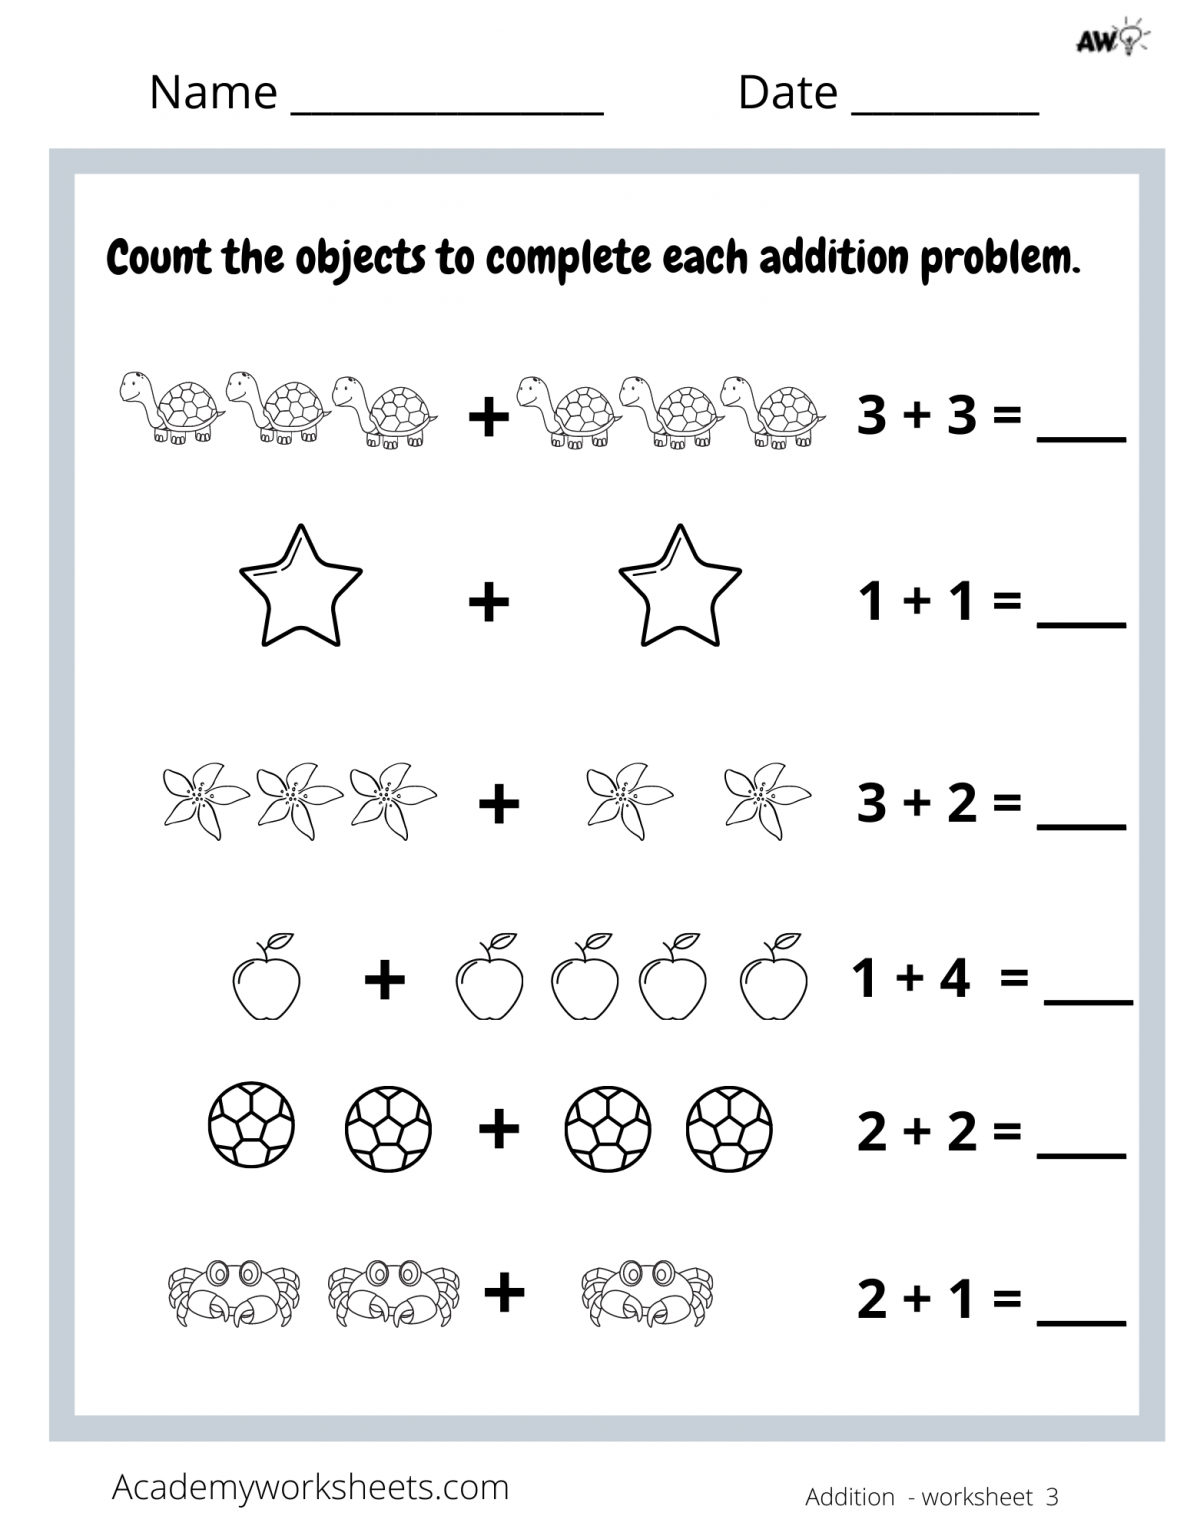 Addition Sums to 5 with Pictures - Academy Worksheets